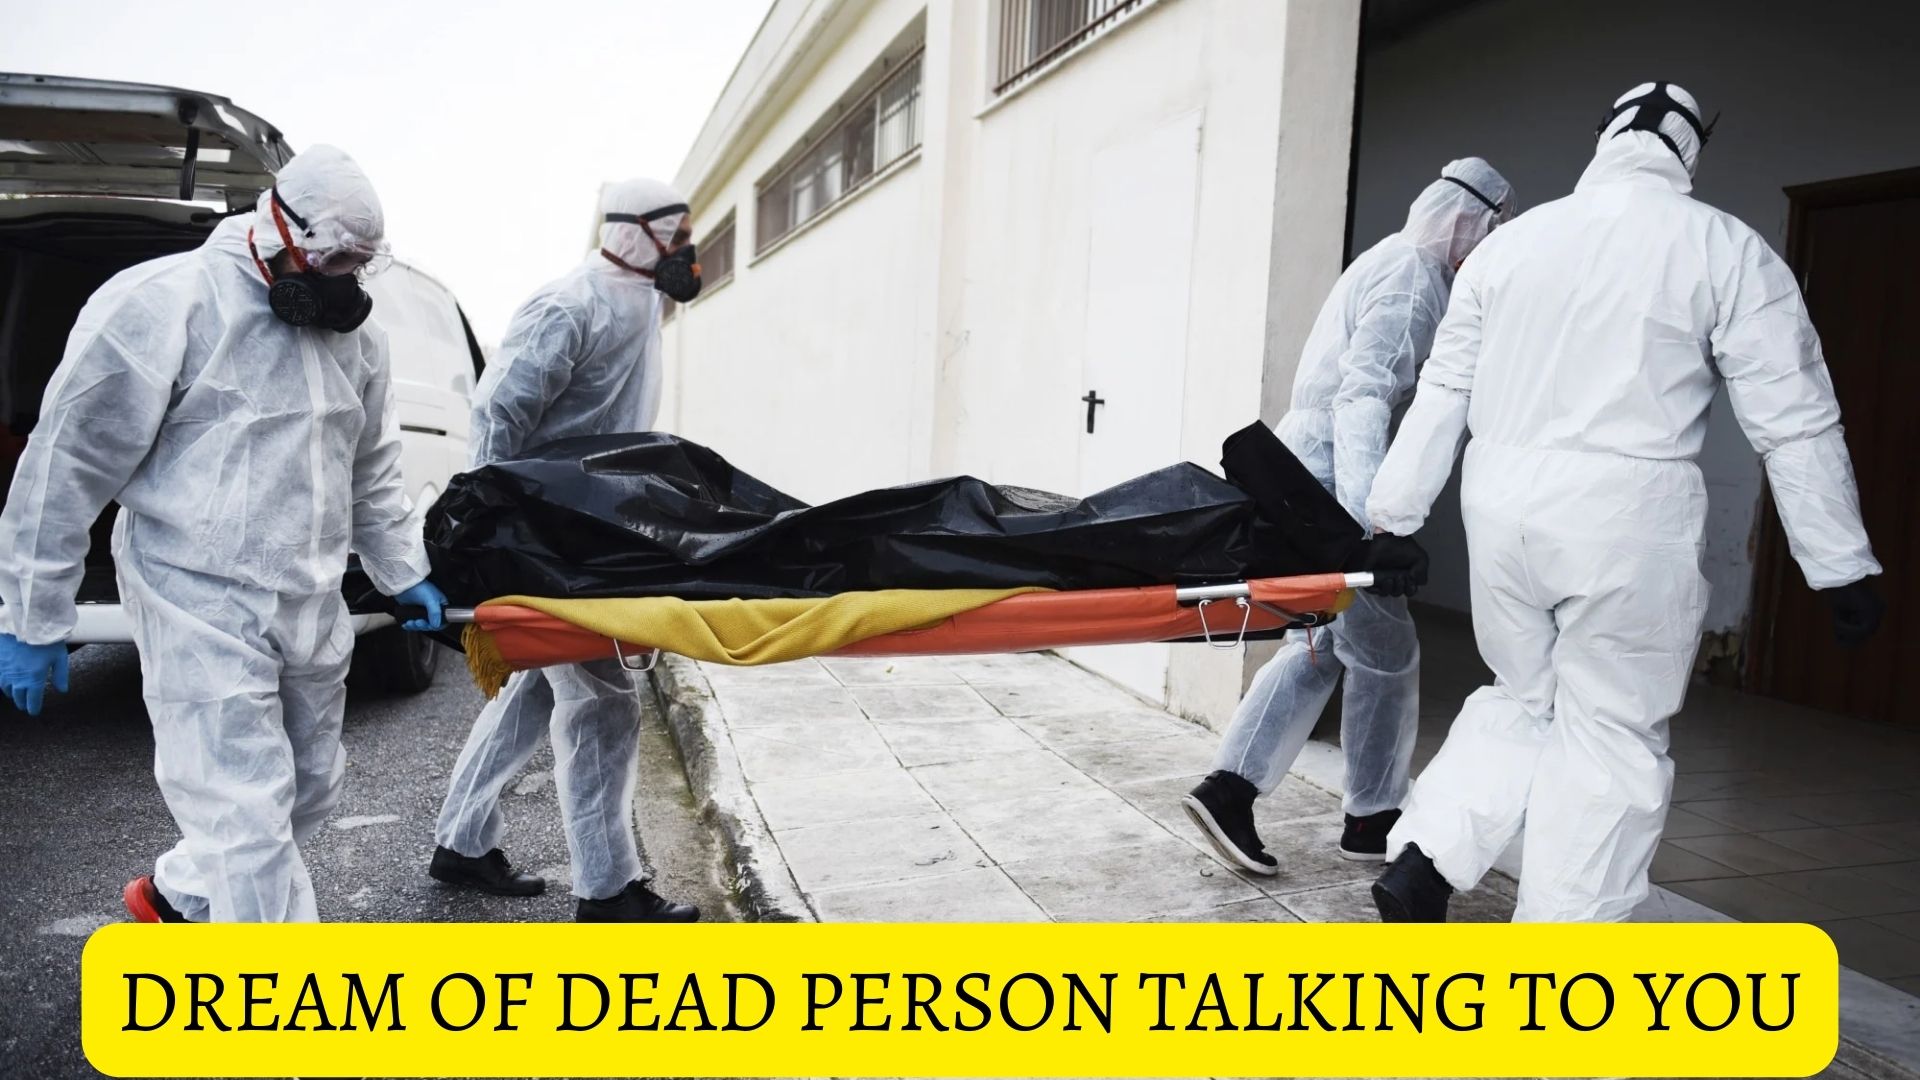 Dream Of Dead Person Talking To You - Reflections Of Our Family's Fears